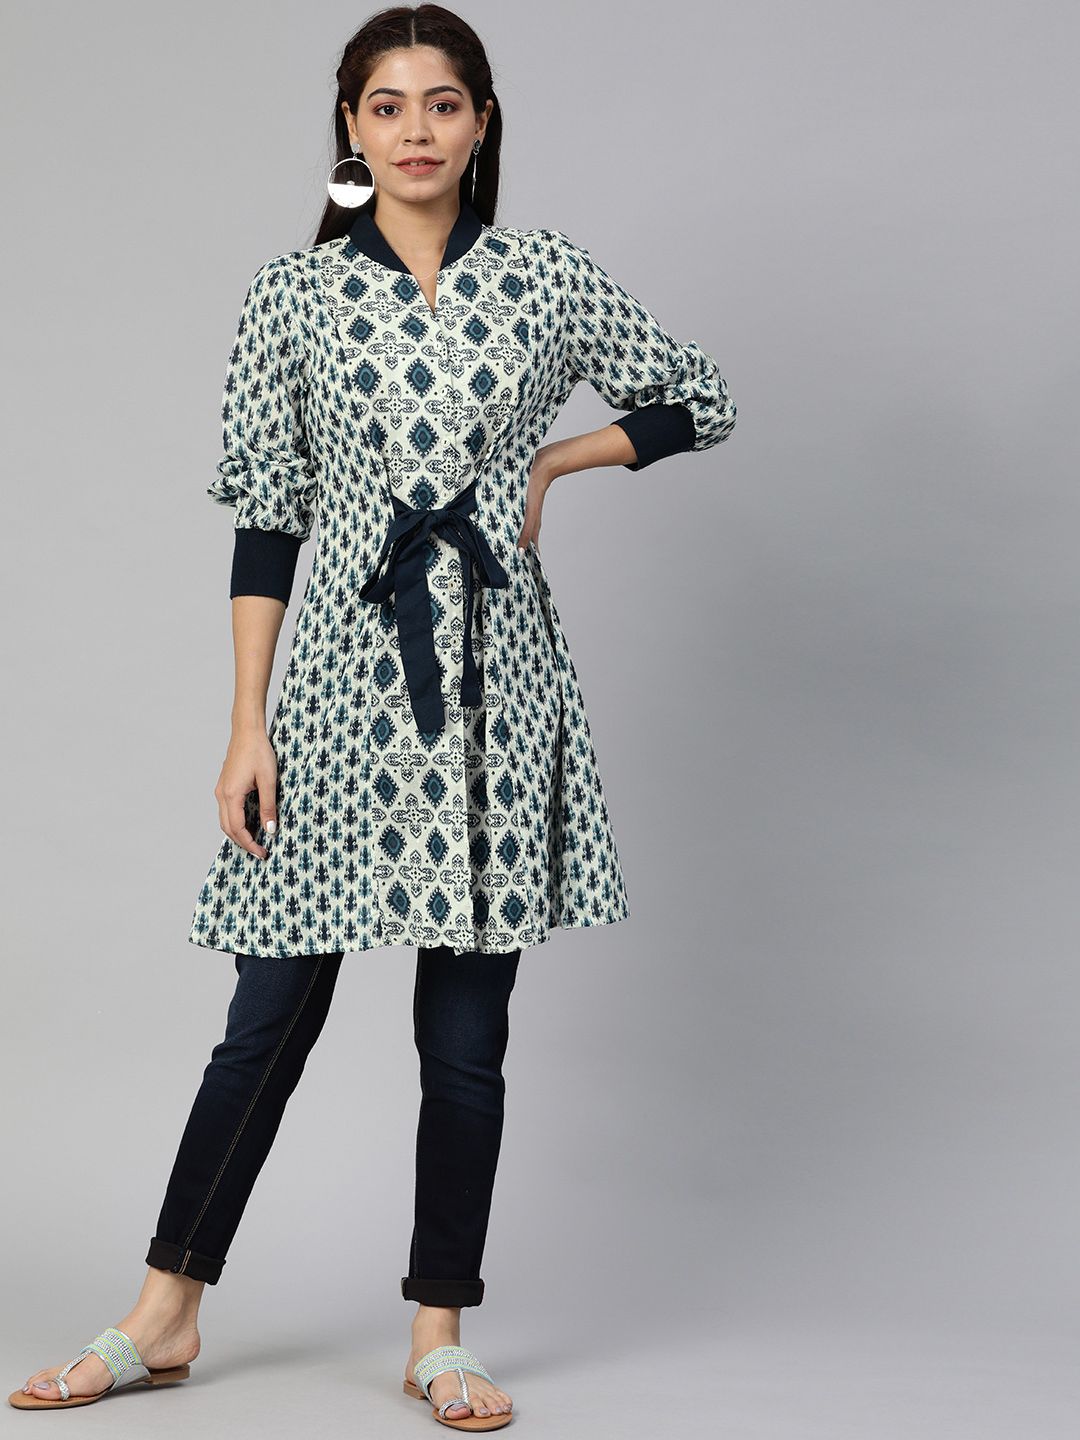 Global Desi Women's White & Blue Printed Panelled Tunic with Waist Tie-Ups Price in India